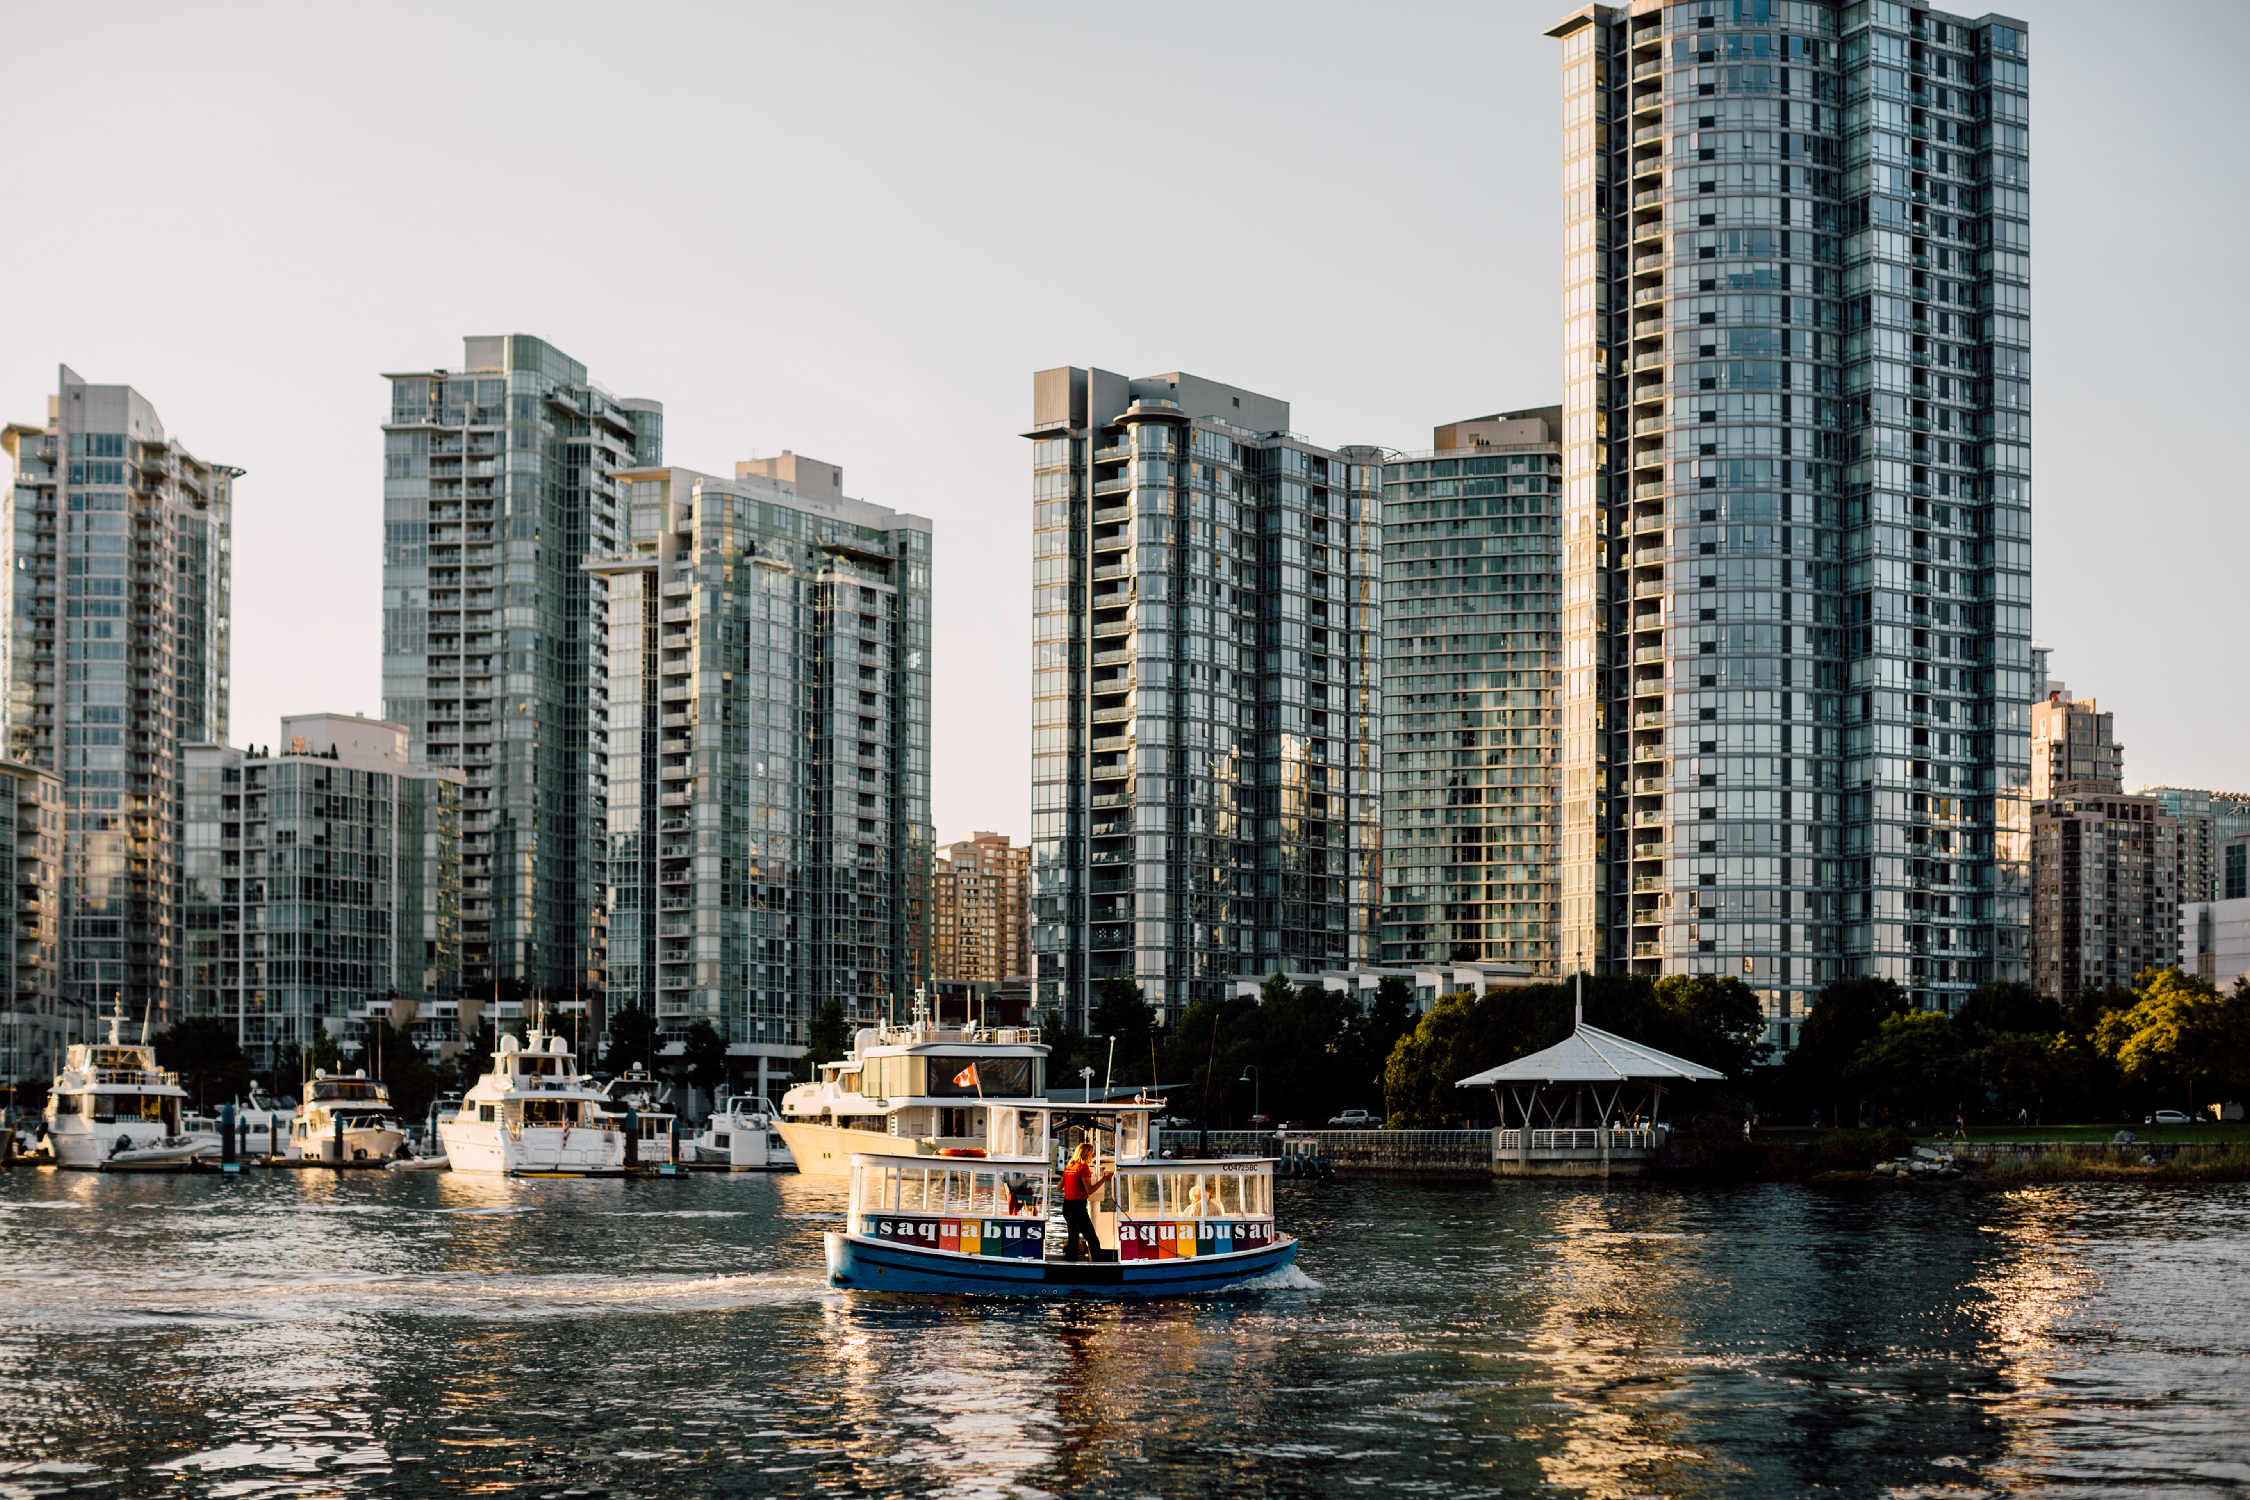 An Aquabus moves across the water from downtown Vancouver. Glass high rises and boats docked at the marina are in the background.